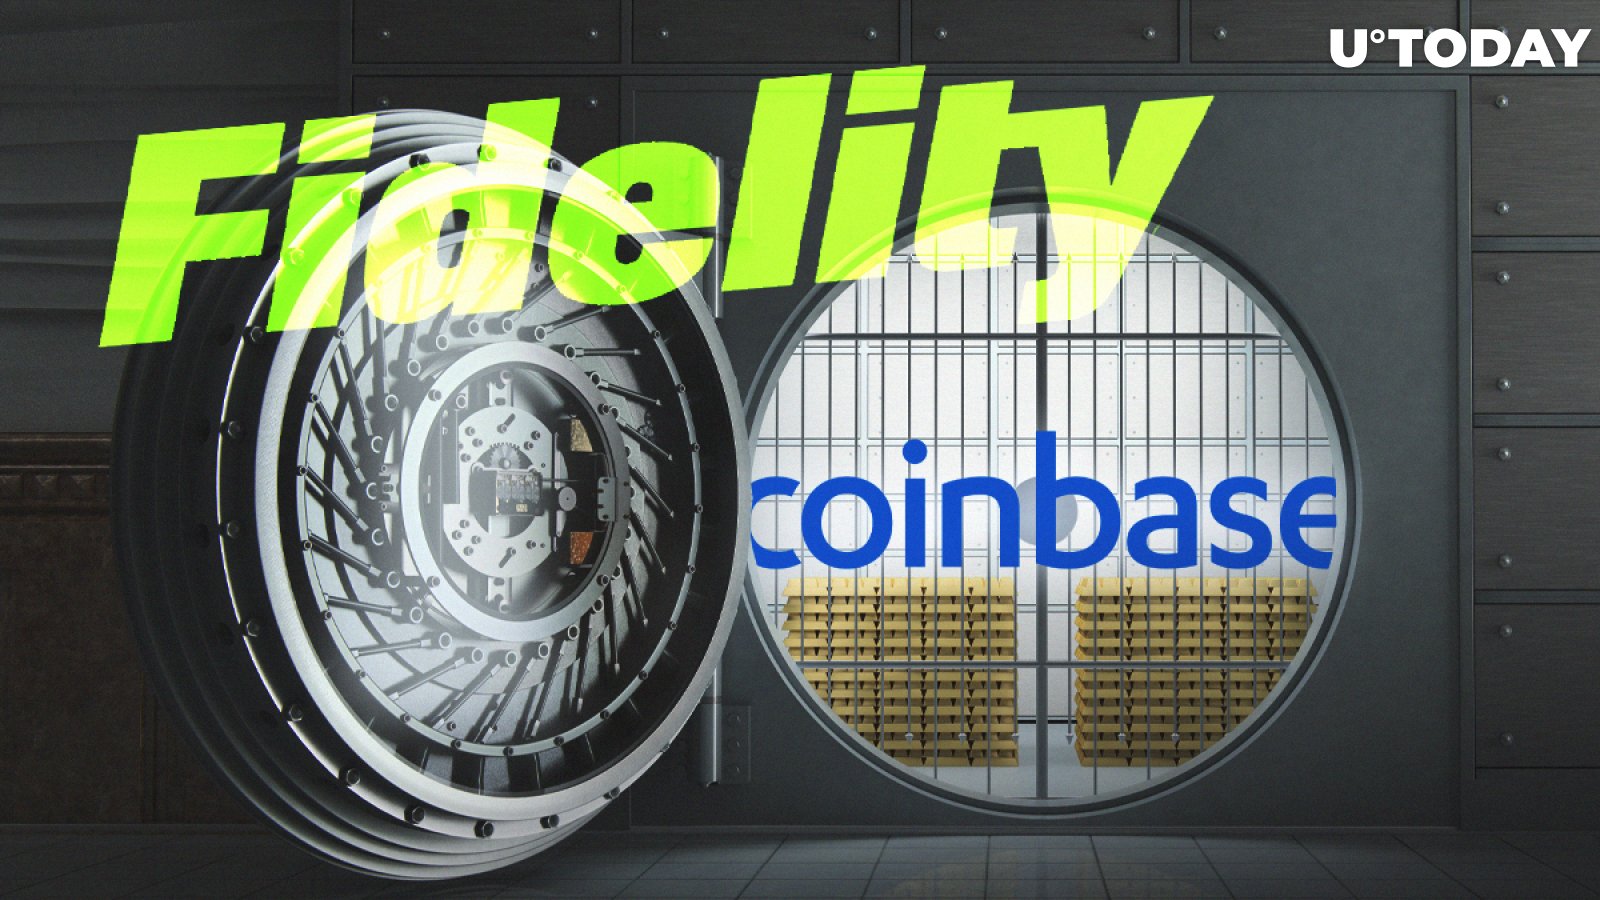 Fidelity Expands Its Cryptocurrency Custody Business, Wants to Take on Coinbase